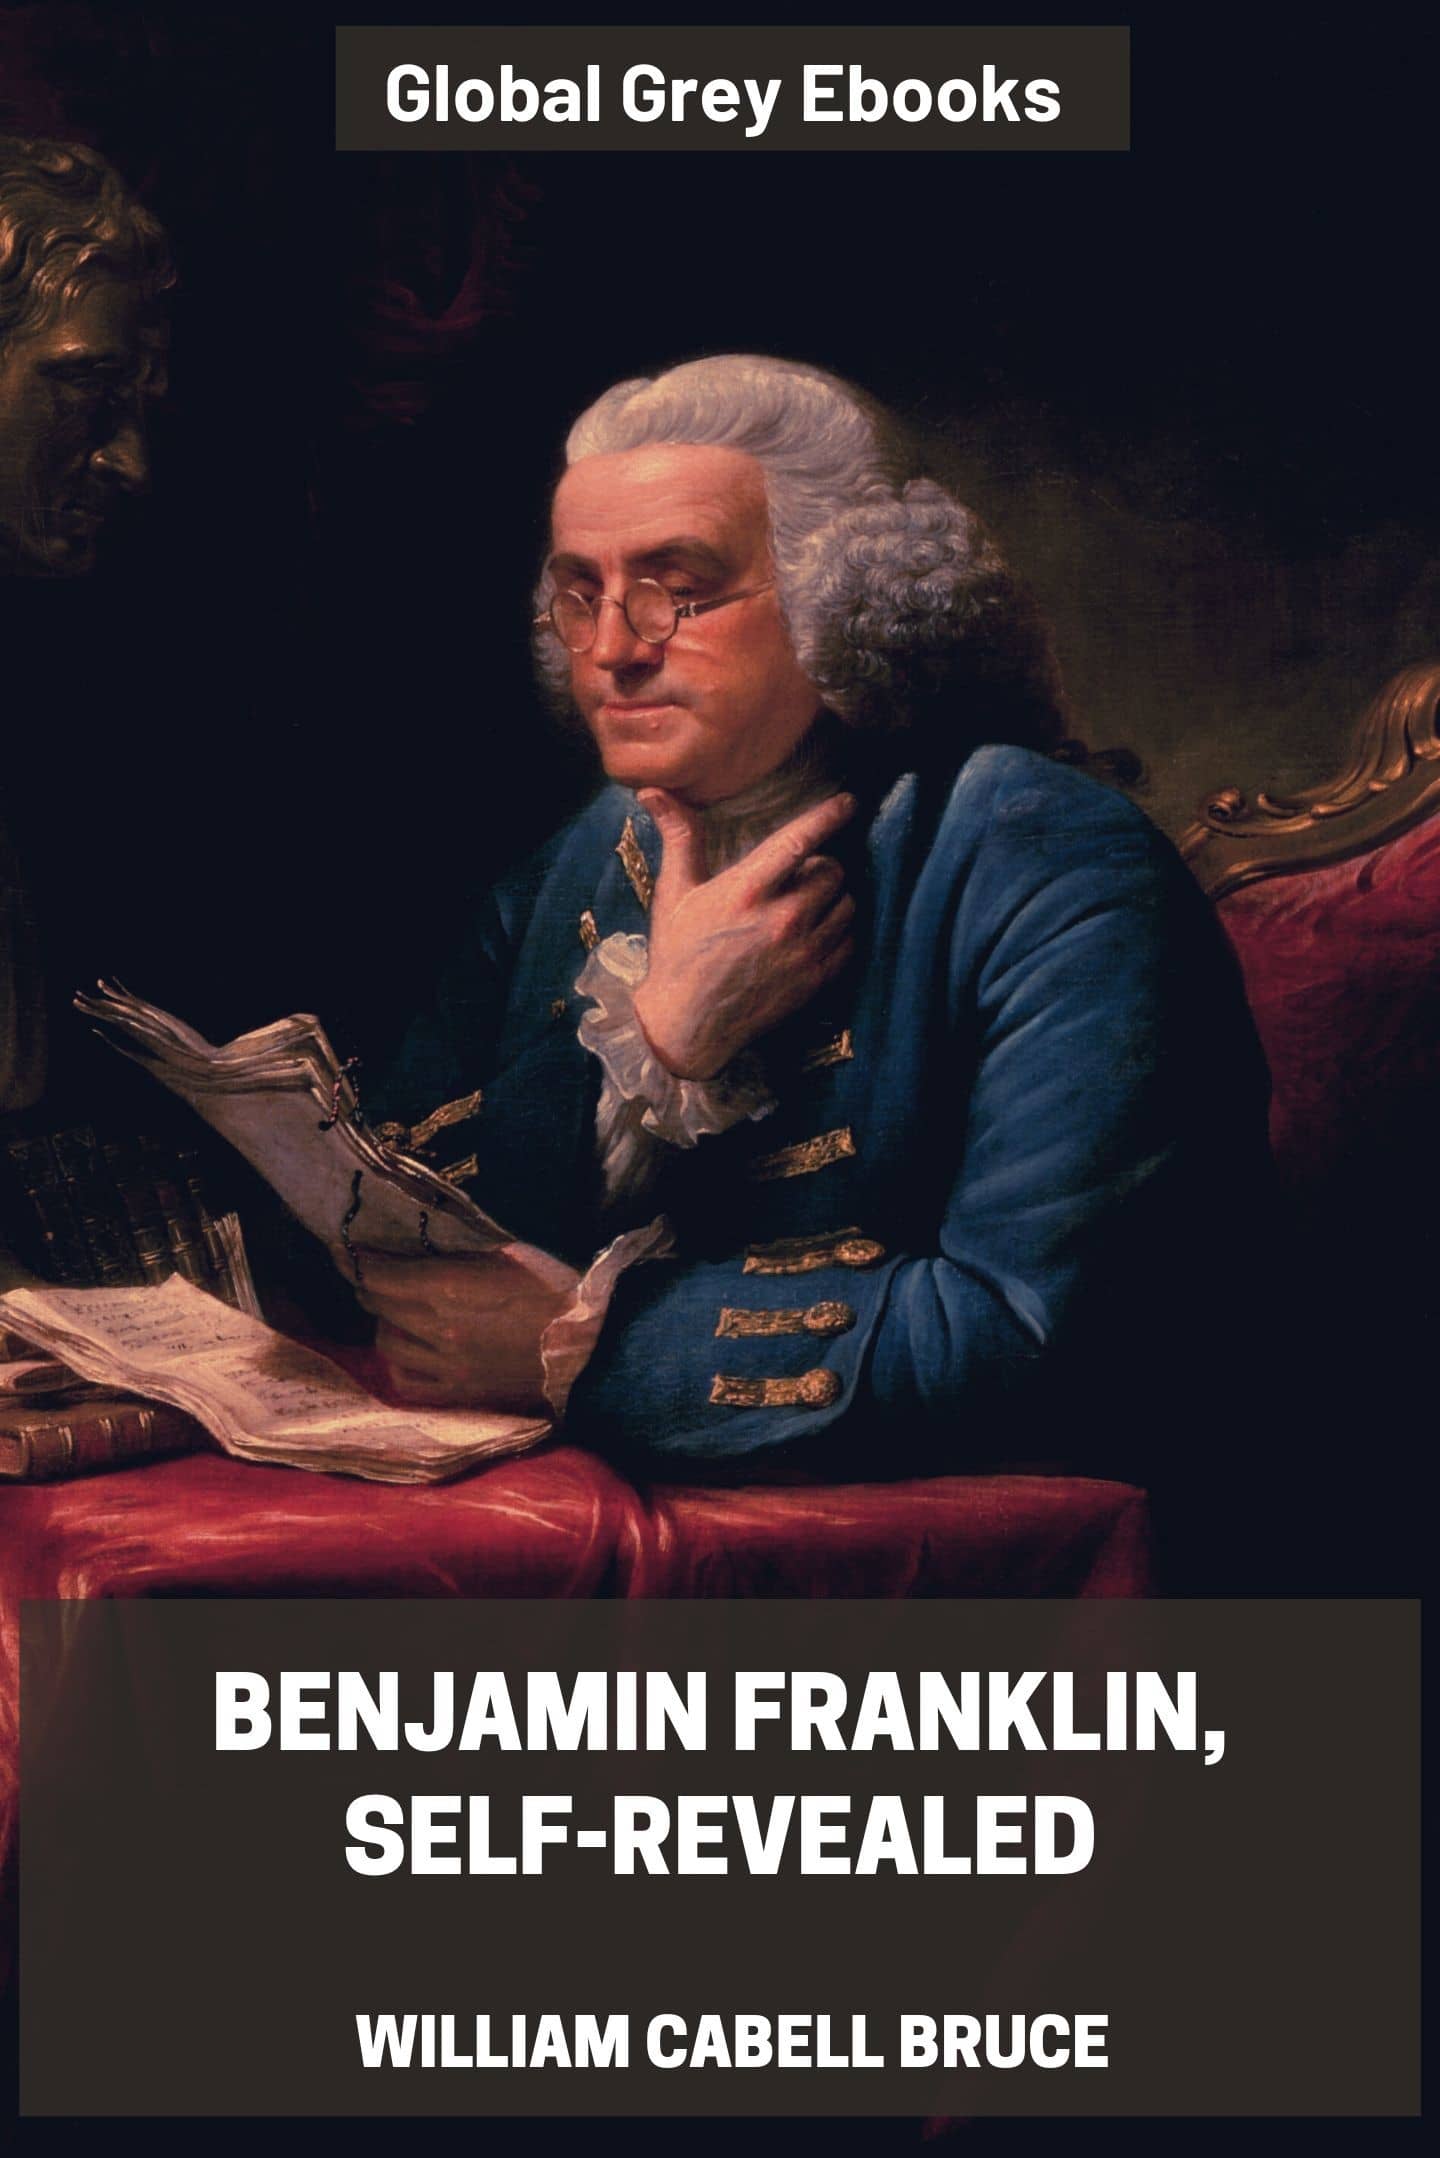 Benjamin Franklin, Self-Revealed, by William Cabell Bruce - Complete text online pic